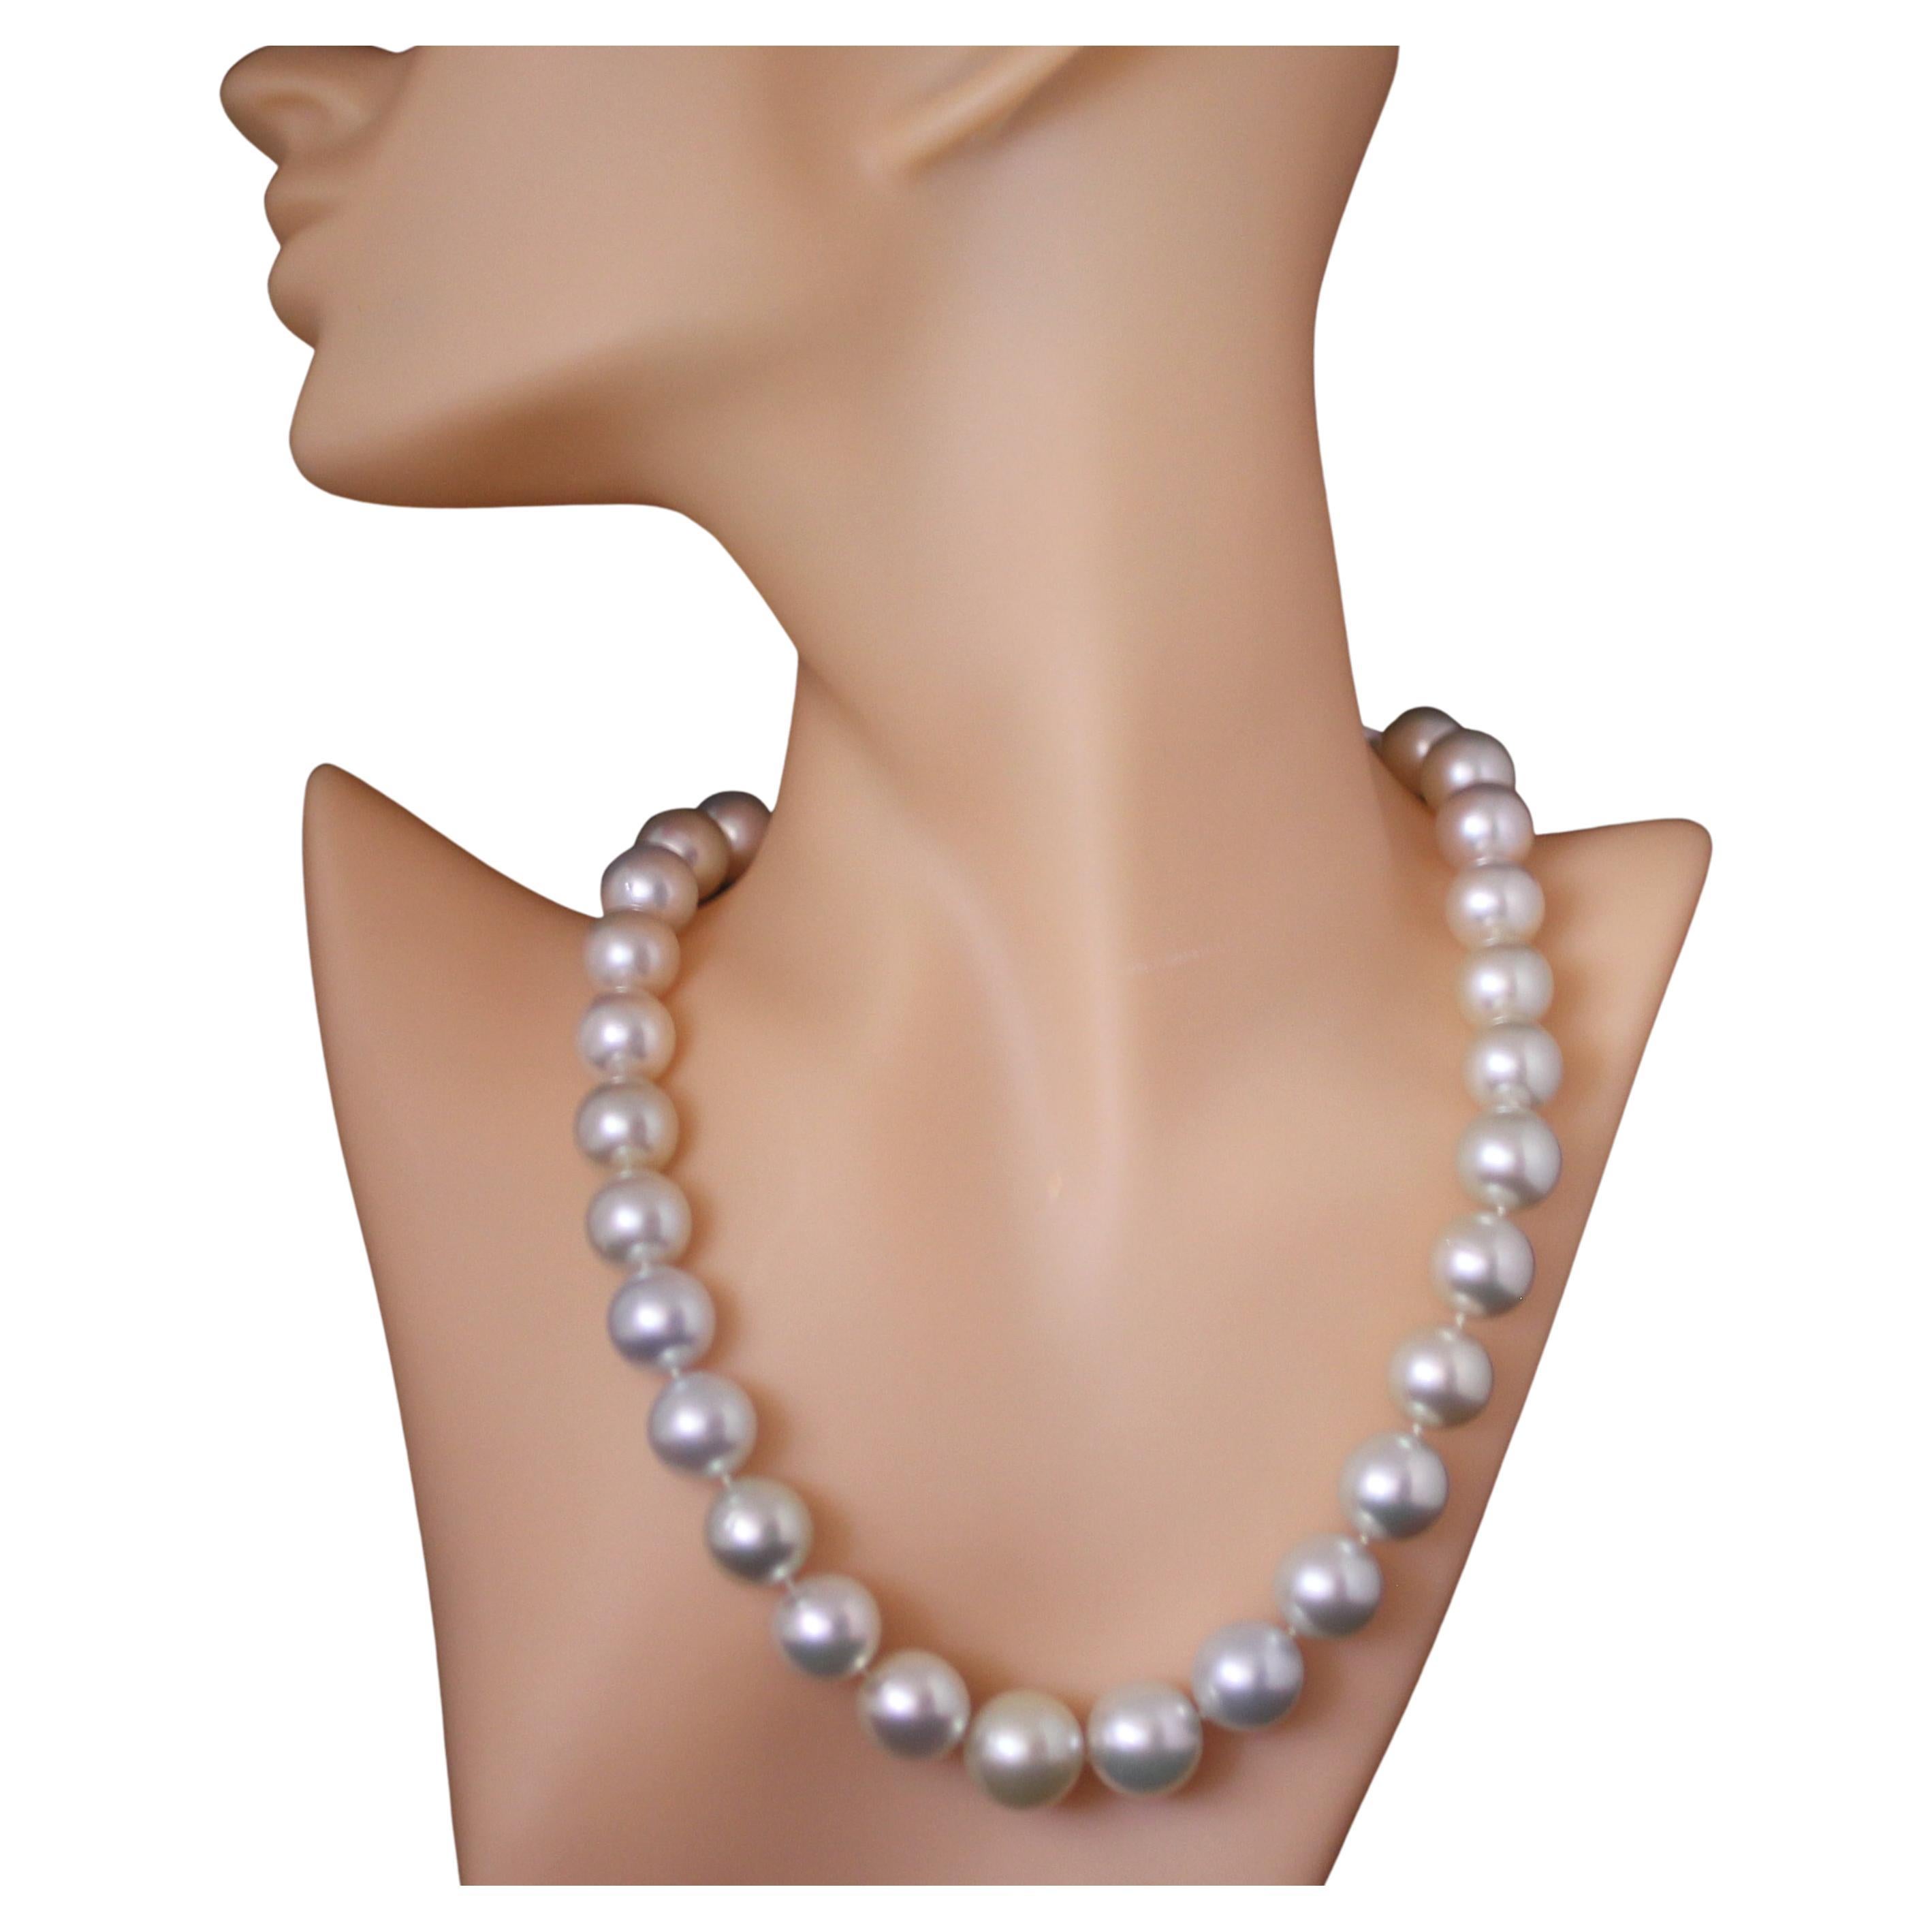 Hakimoto By Jewel Of Ocean 18K South Sea Strand Necklace
18K White Gold  
Weight (g): 107.7
Cultured South Sea Pearl 
Pearl Size: 15X12mm 
Pearl Shape: Round 
Body color: White 
Orient: Very Good
Luster: Very Good 
Surface: Clean
Nacre: Very